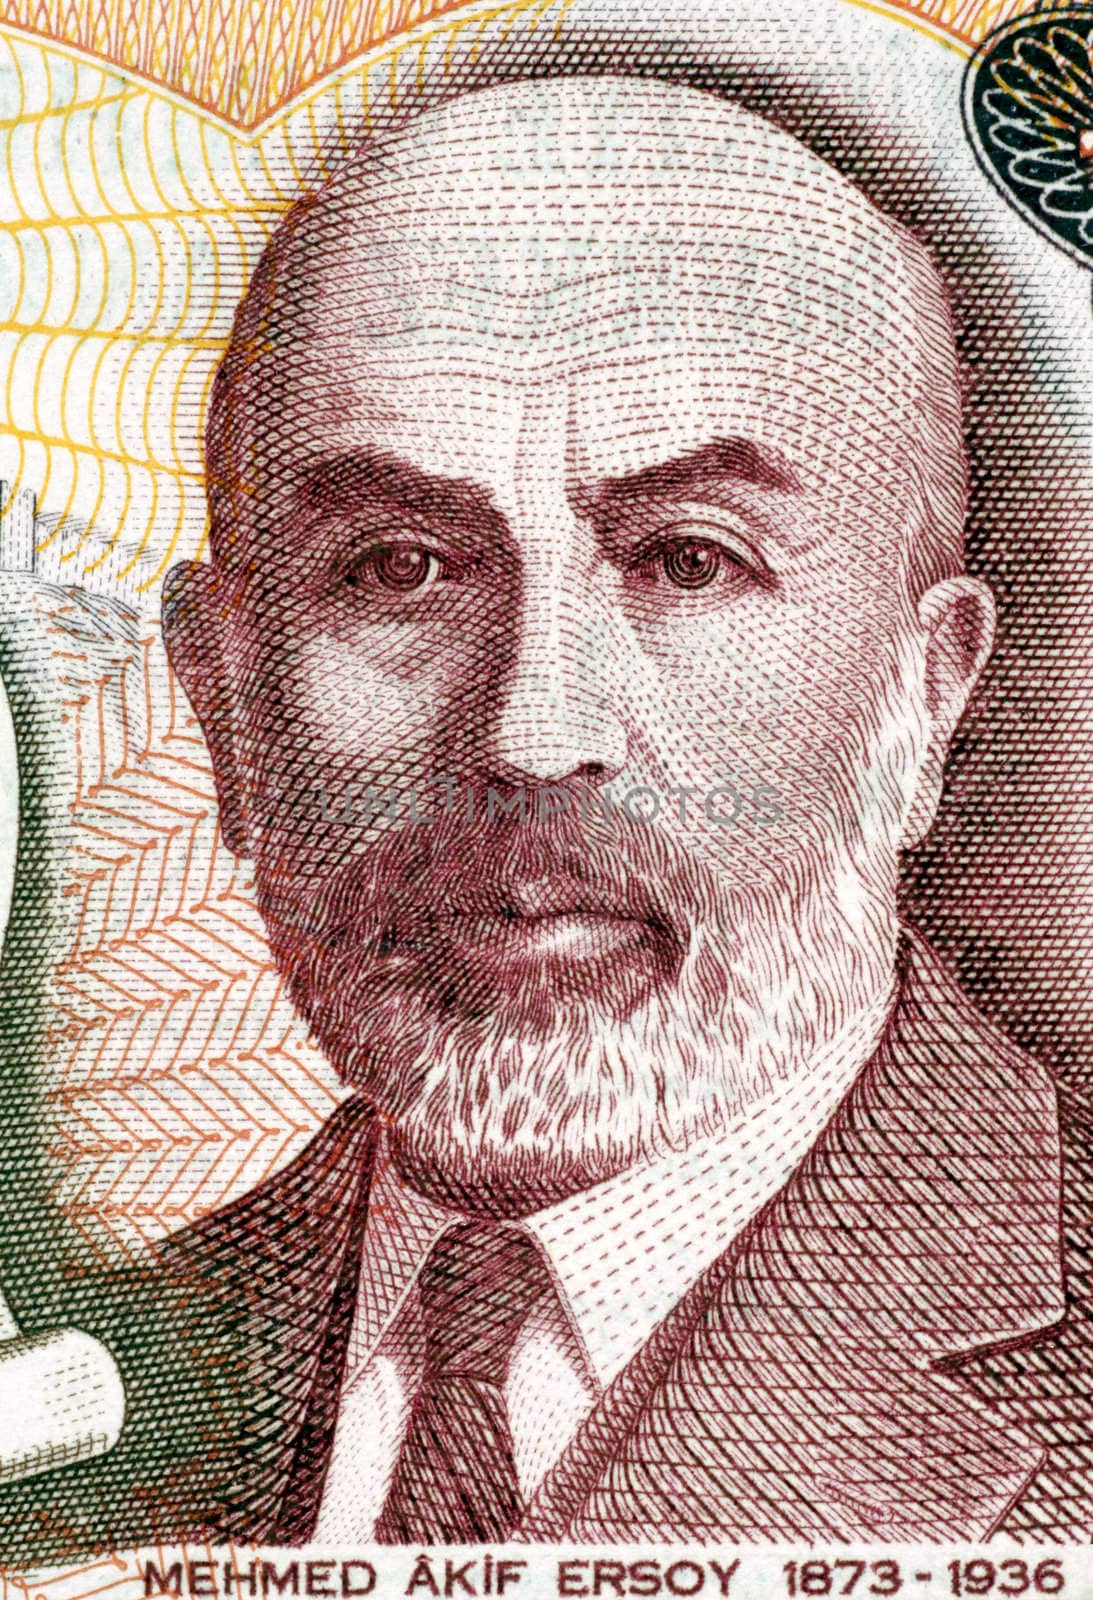 Mehmet Akif Ersoy (1873-1936) on 100 Lira 1984 Banknote from Turkey.Turkish poet, author, academic and member of parliament.